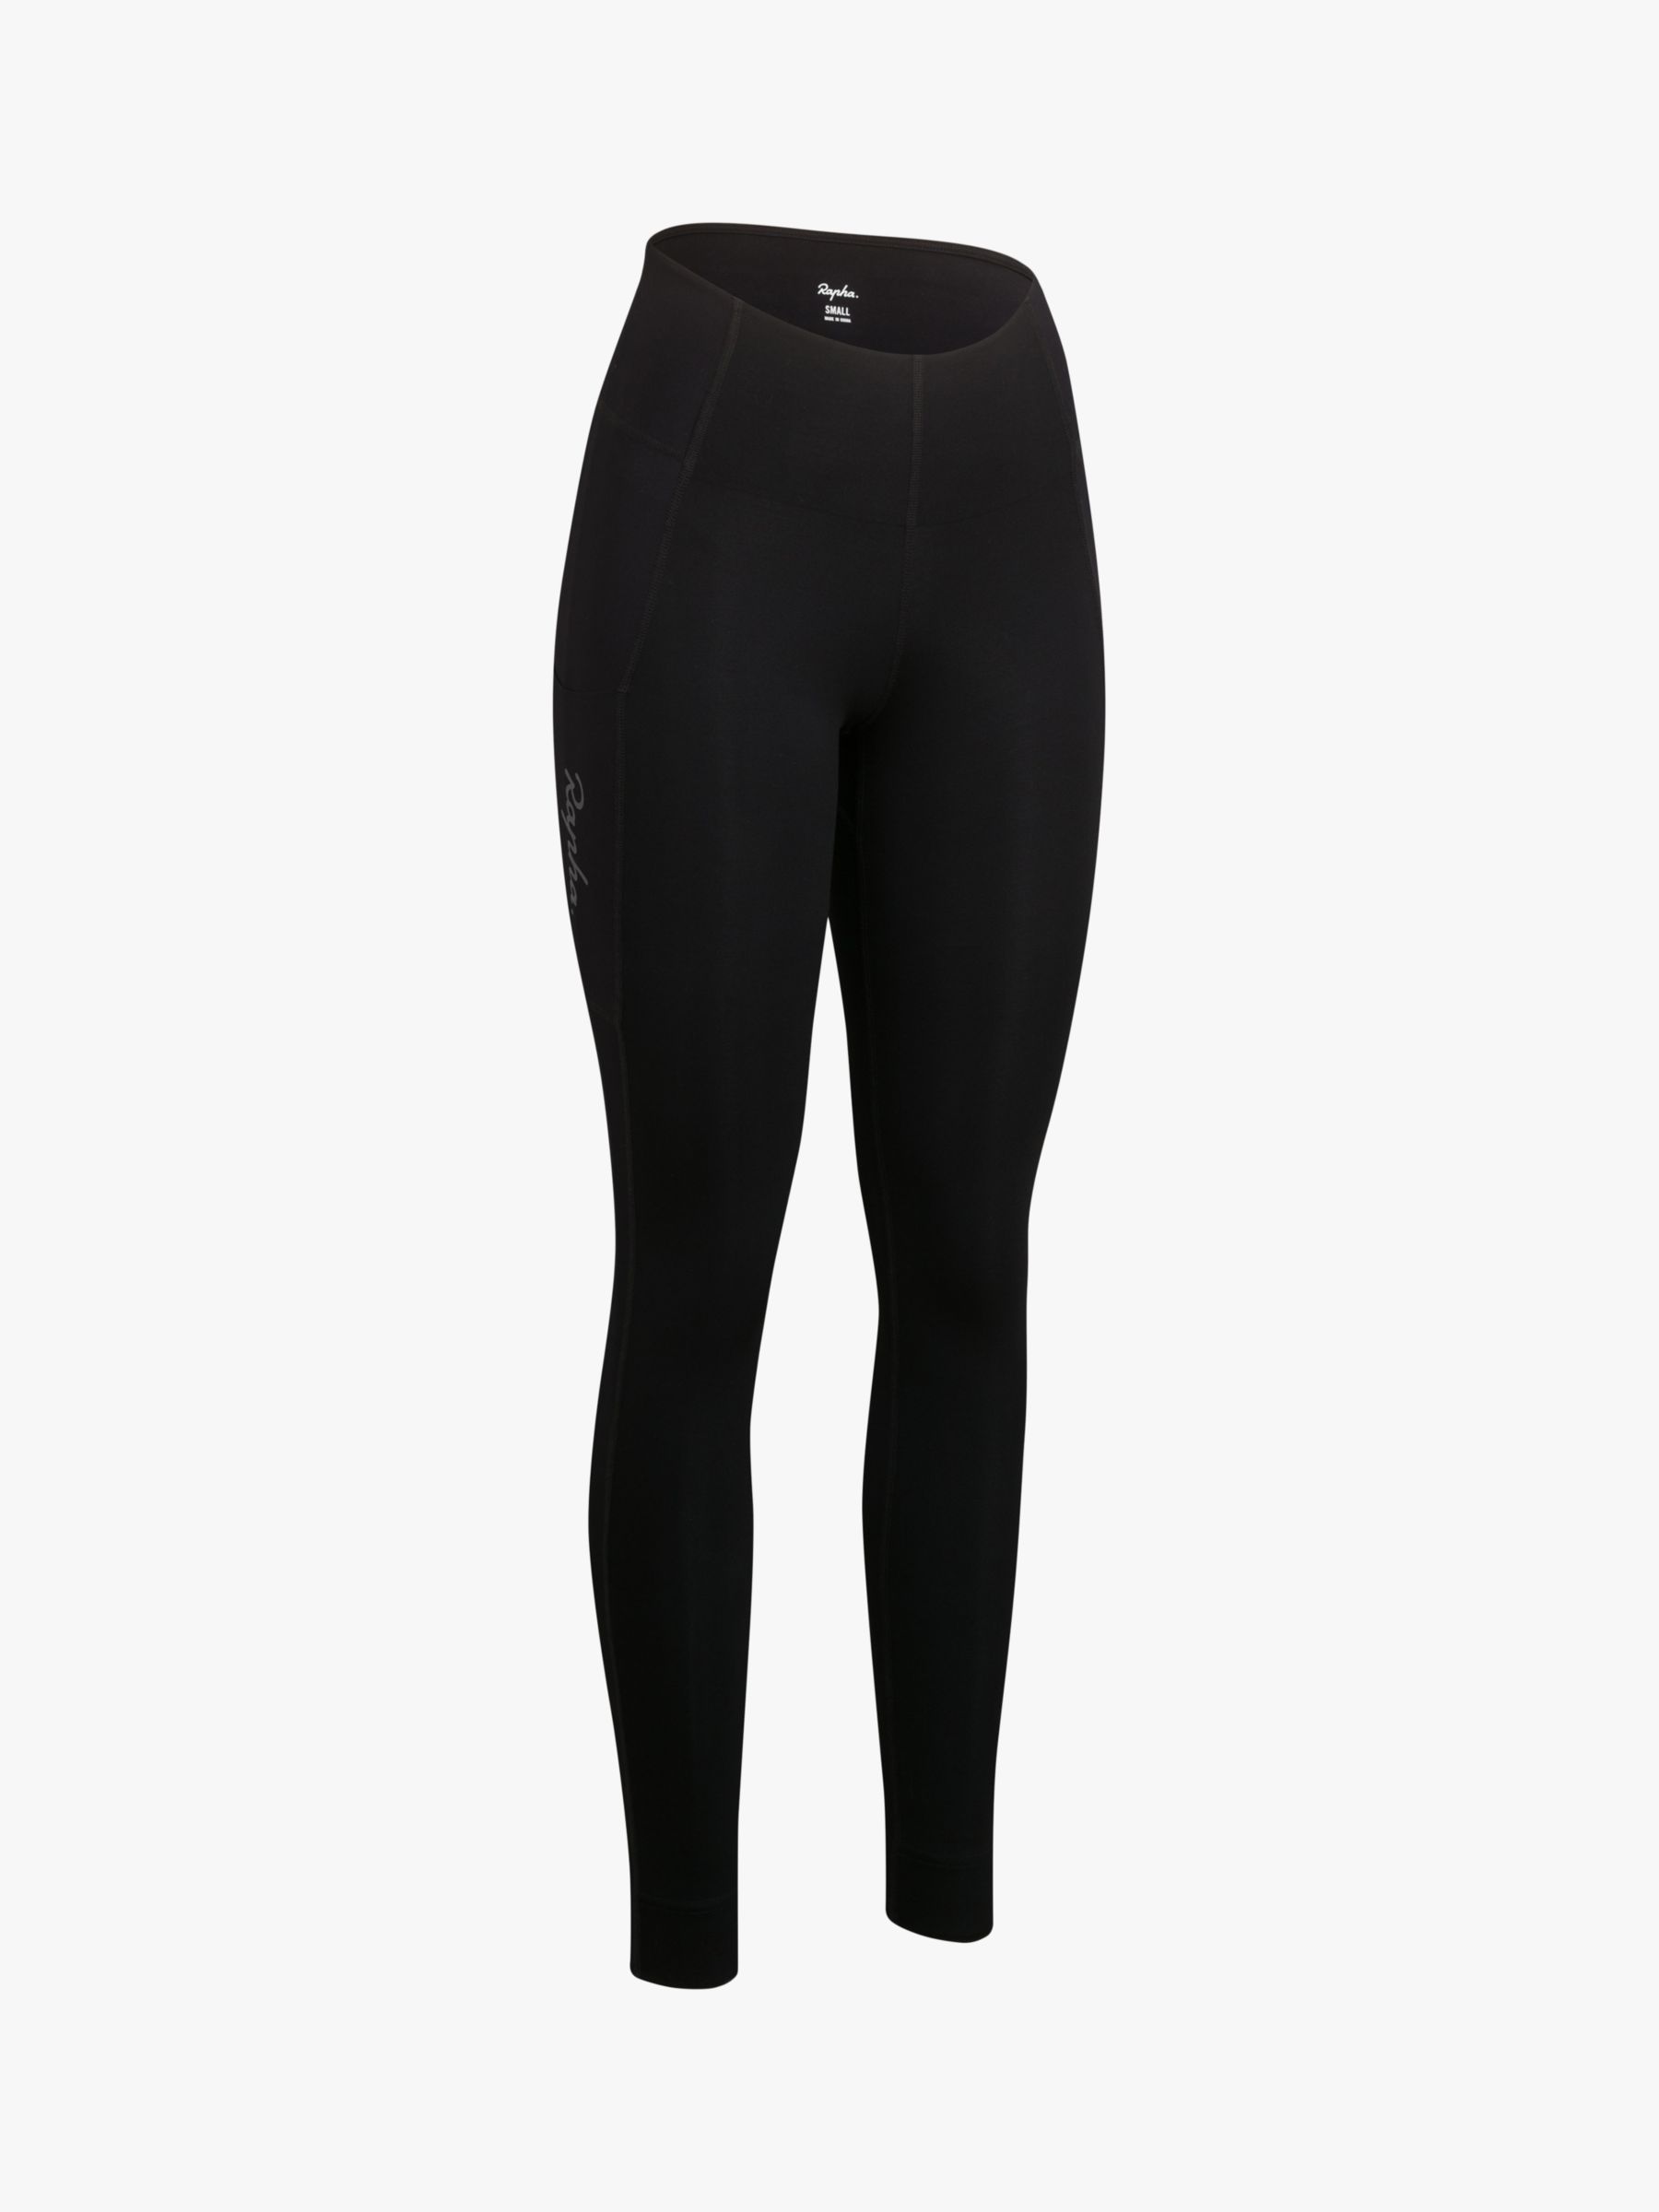 Rapha All-Day 7/8 Recycled Leggings